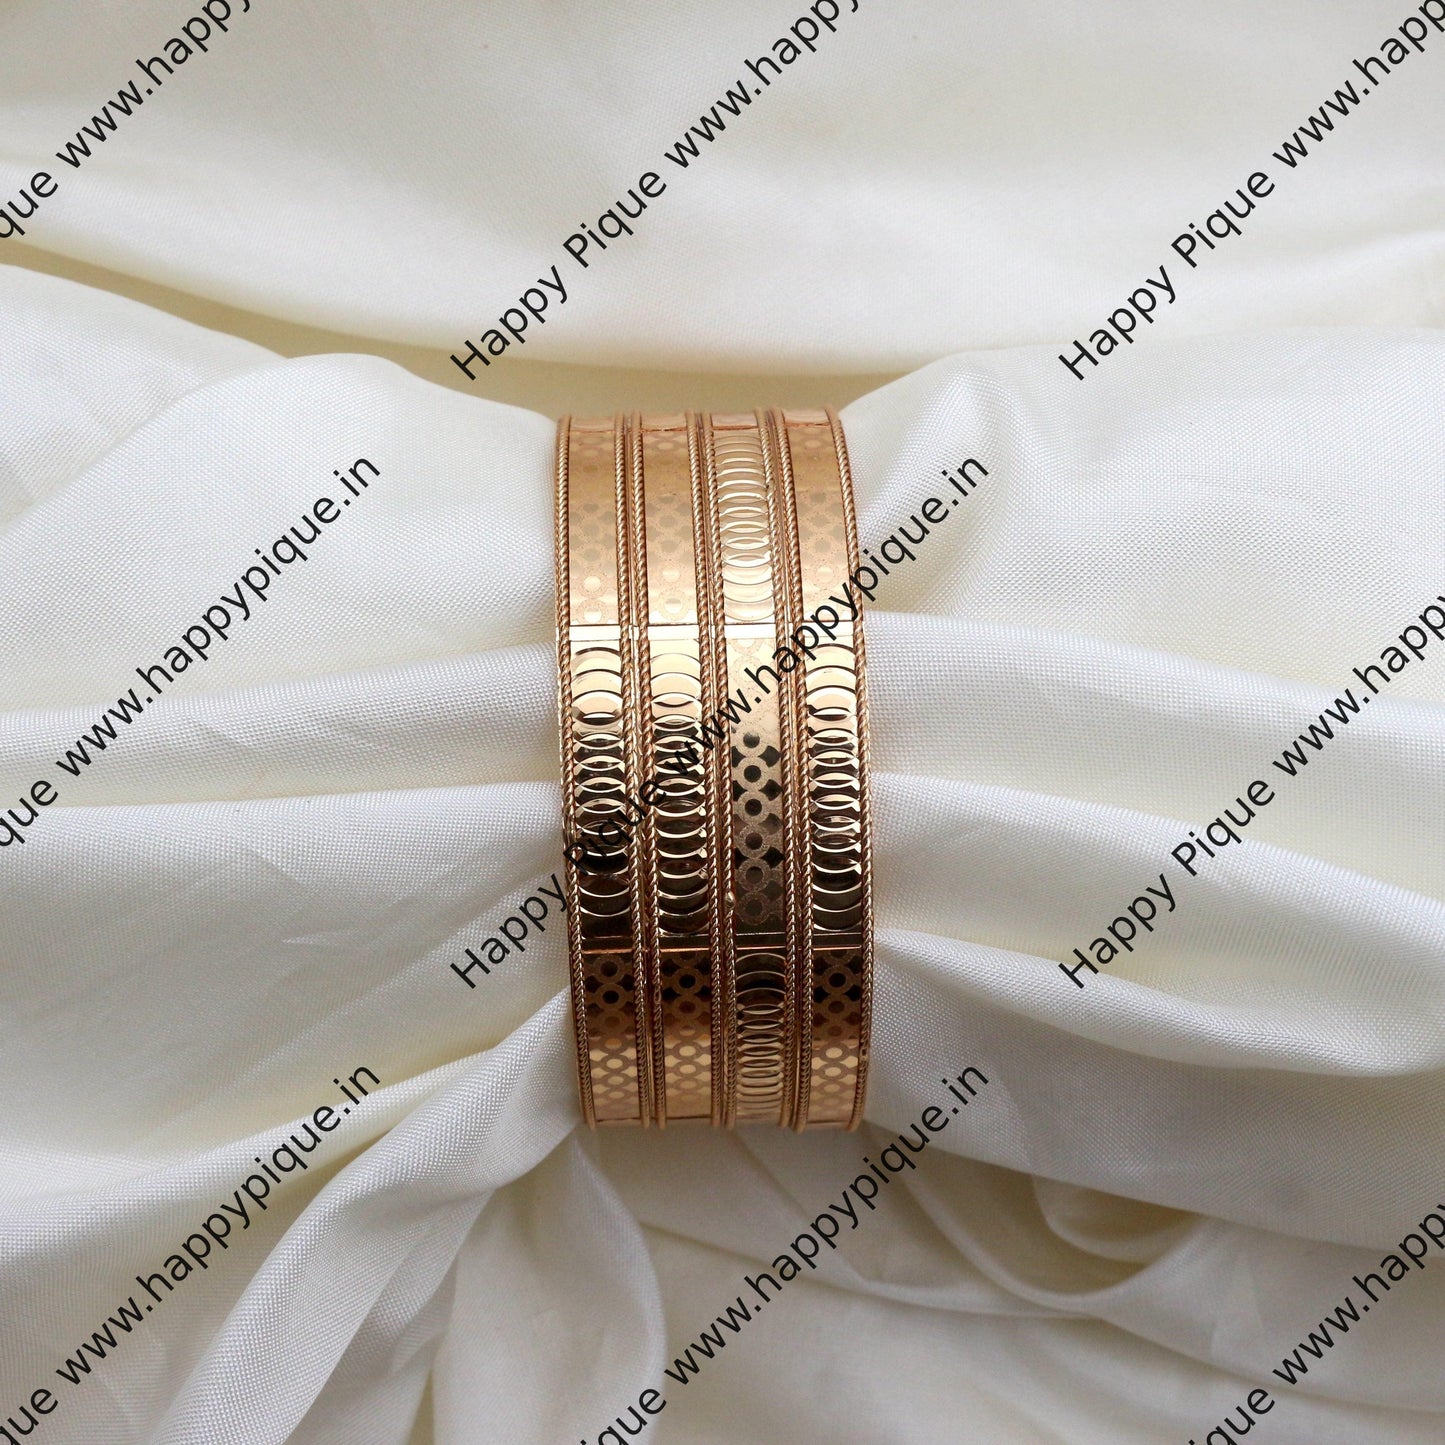 Real Gold Tone Set of 4 Flat Bangles - SS012 - Daily Wear/Office Wear/Function Wear Bangles